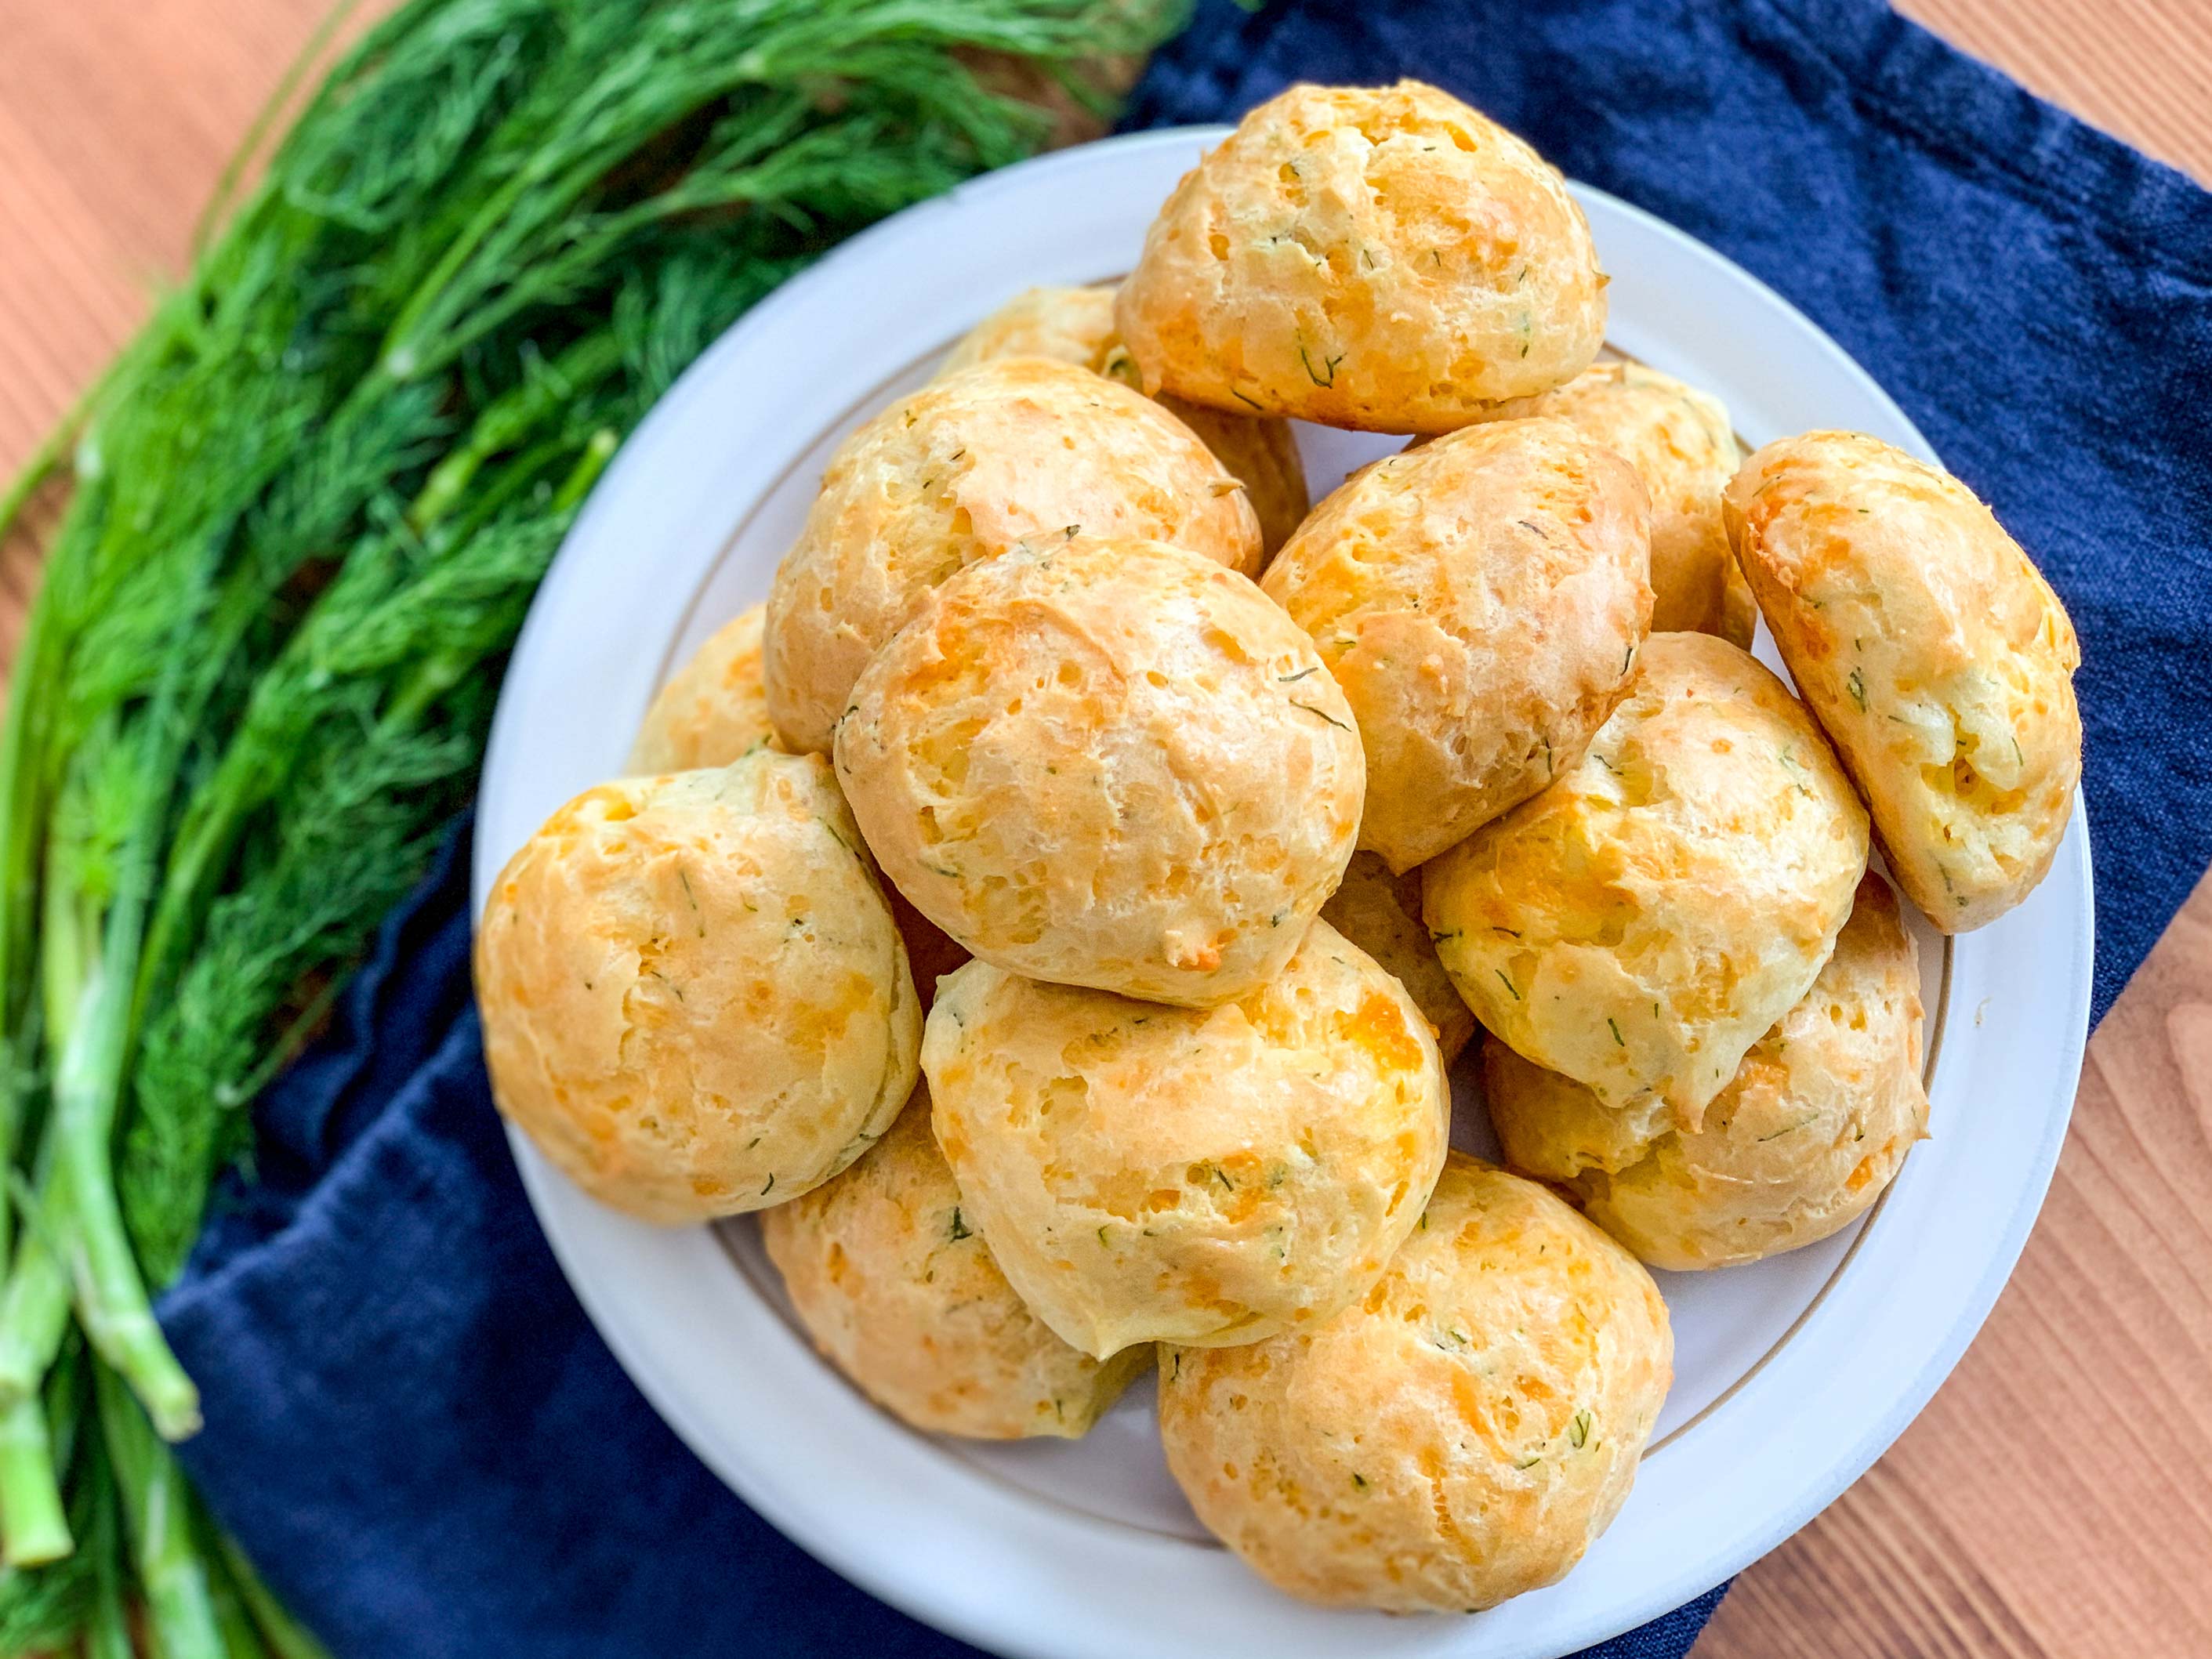 cheddar cheese and dill puffs on a plate